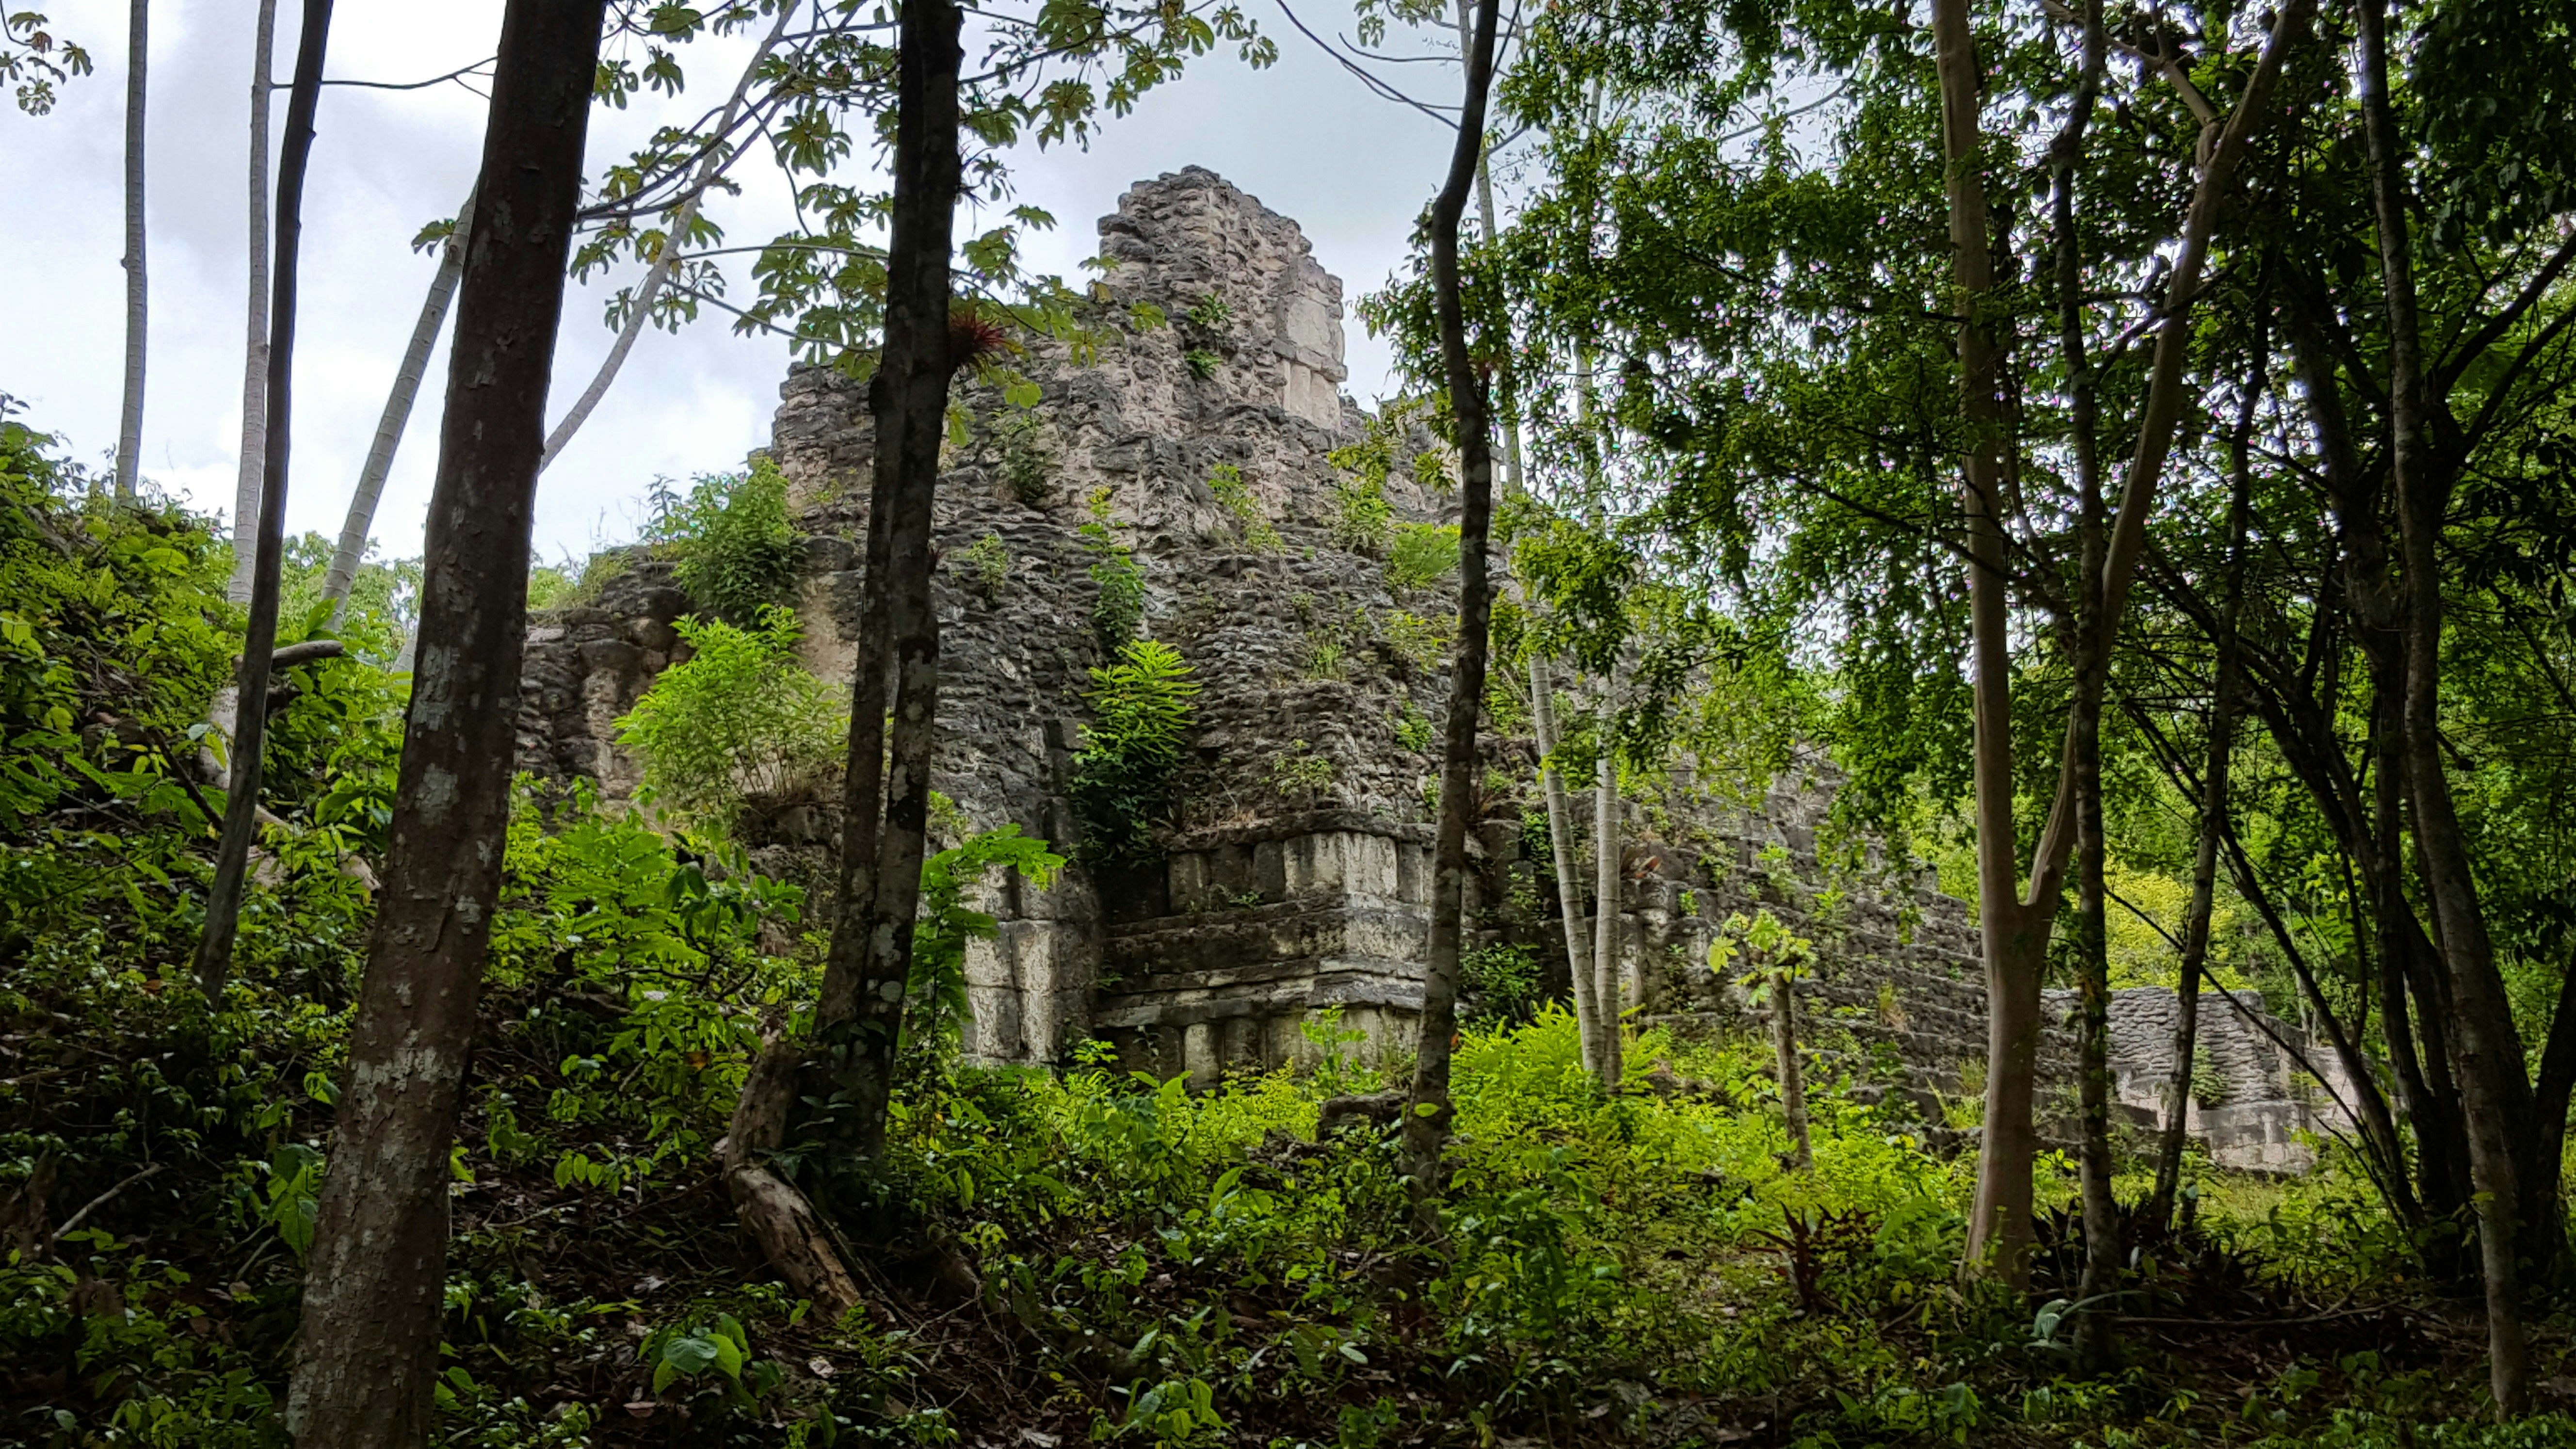 A stepped pyramid-like structure covered in mosses is partially obscured by jungle trees